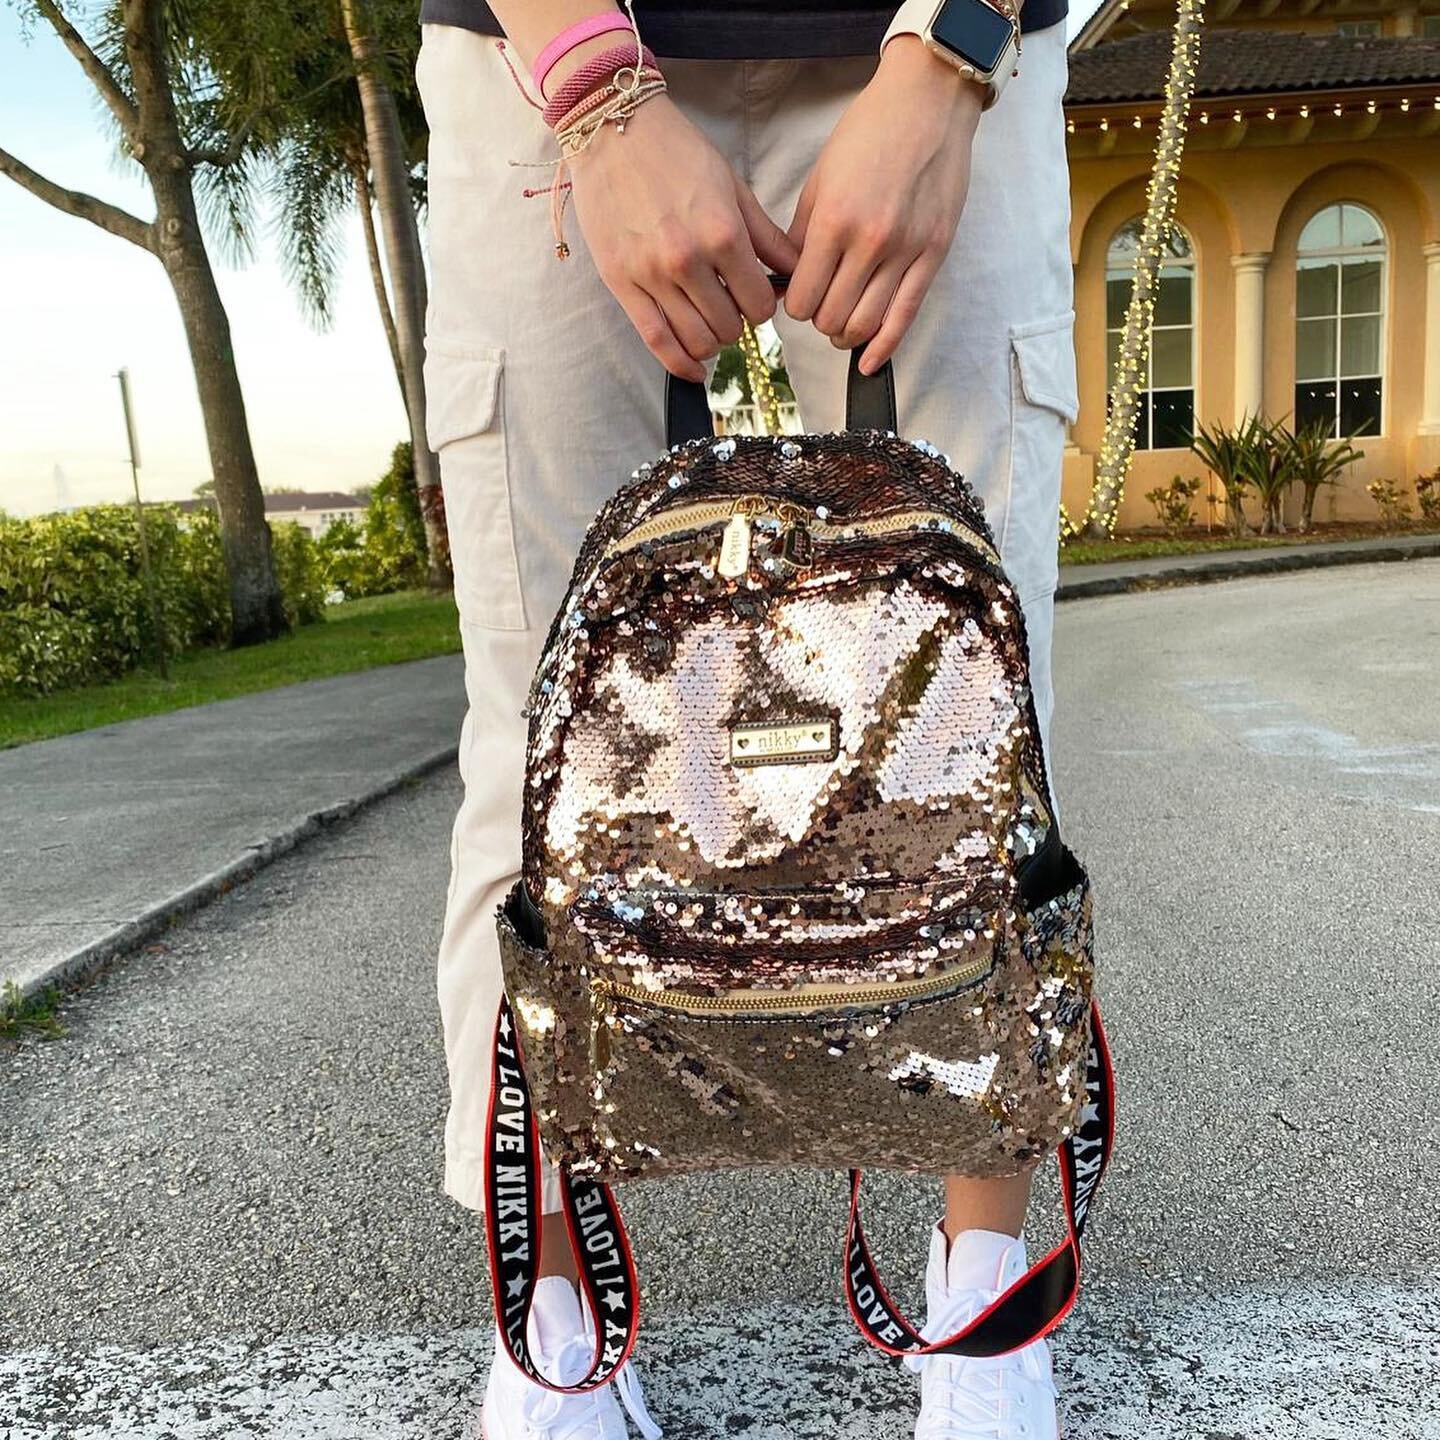 Perfect for city adventures, the Nikky Gretel Backpack gives you the perfect finishing pop up touch on the go!💕Visit our official website nicoleleeusa.com/nl-stores to find your nearest distributor to shop our new arrivals! To shop directly visit ni